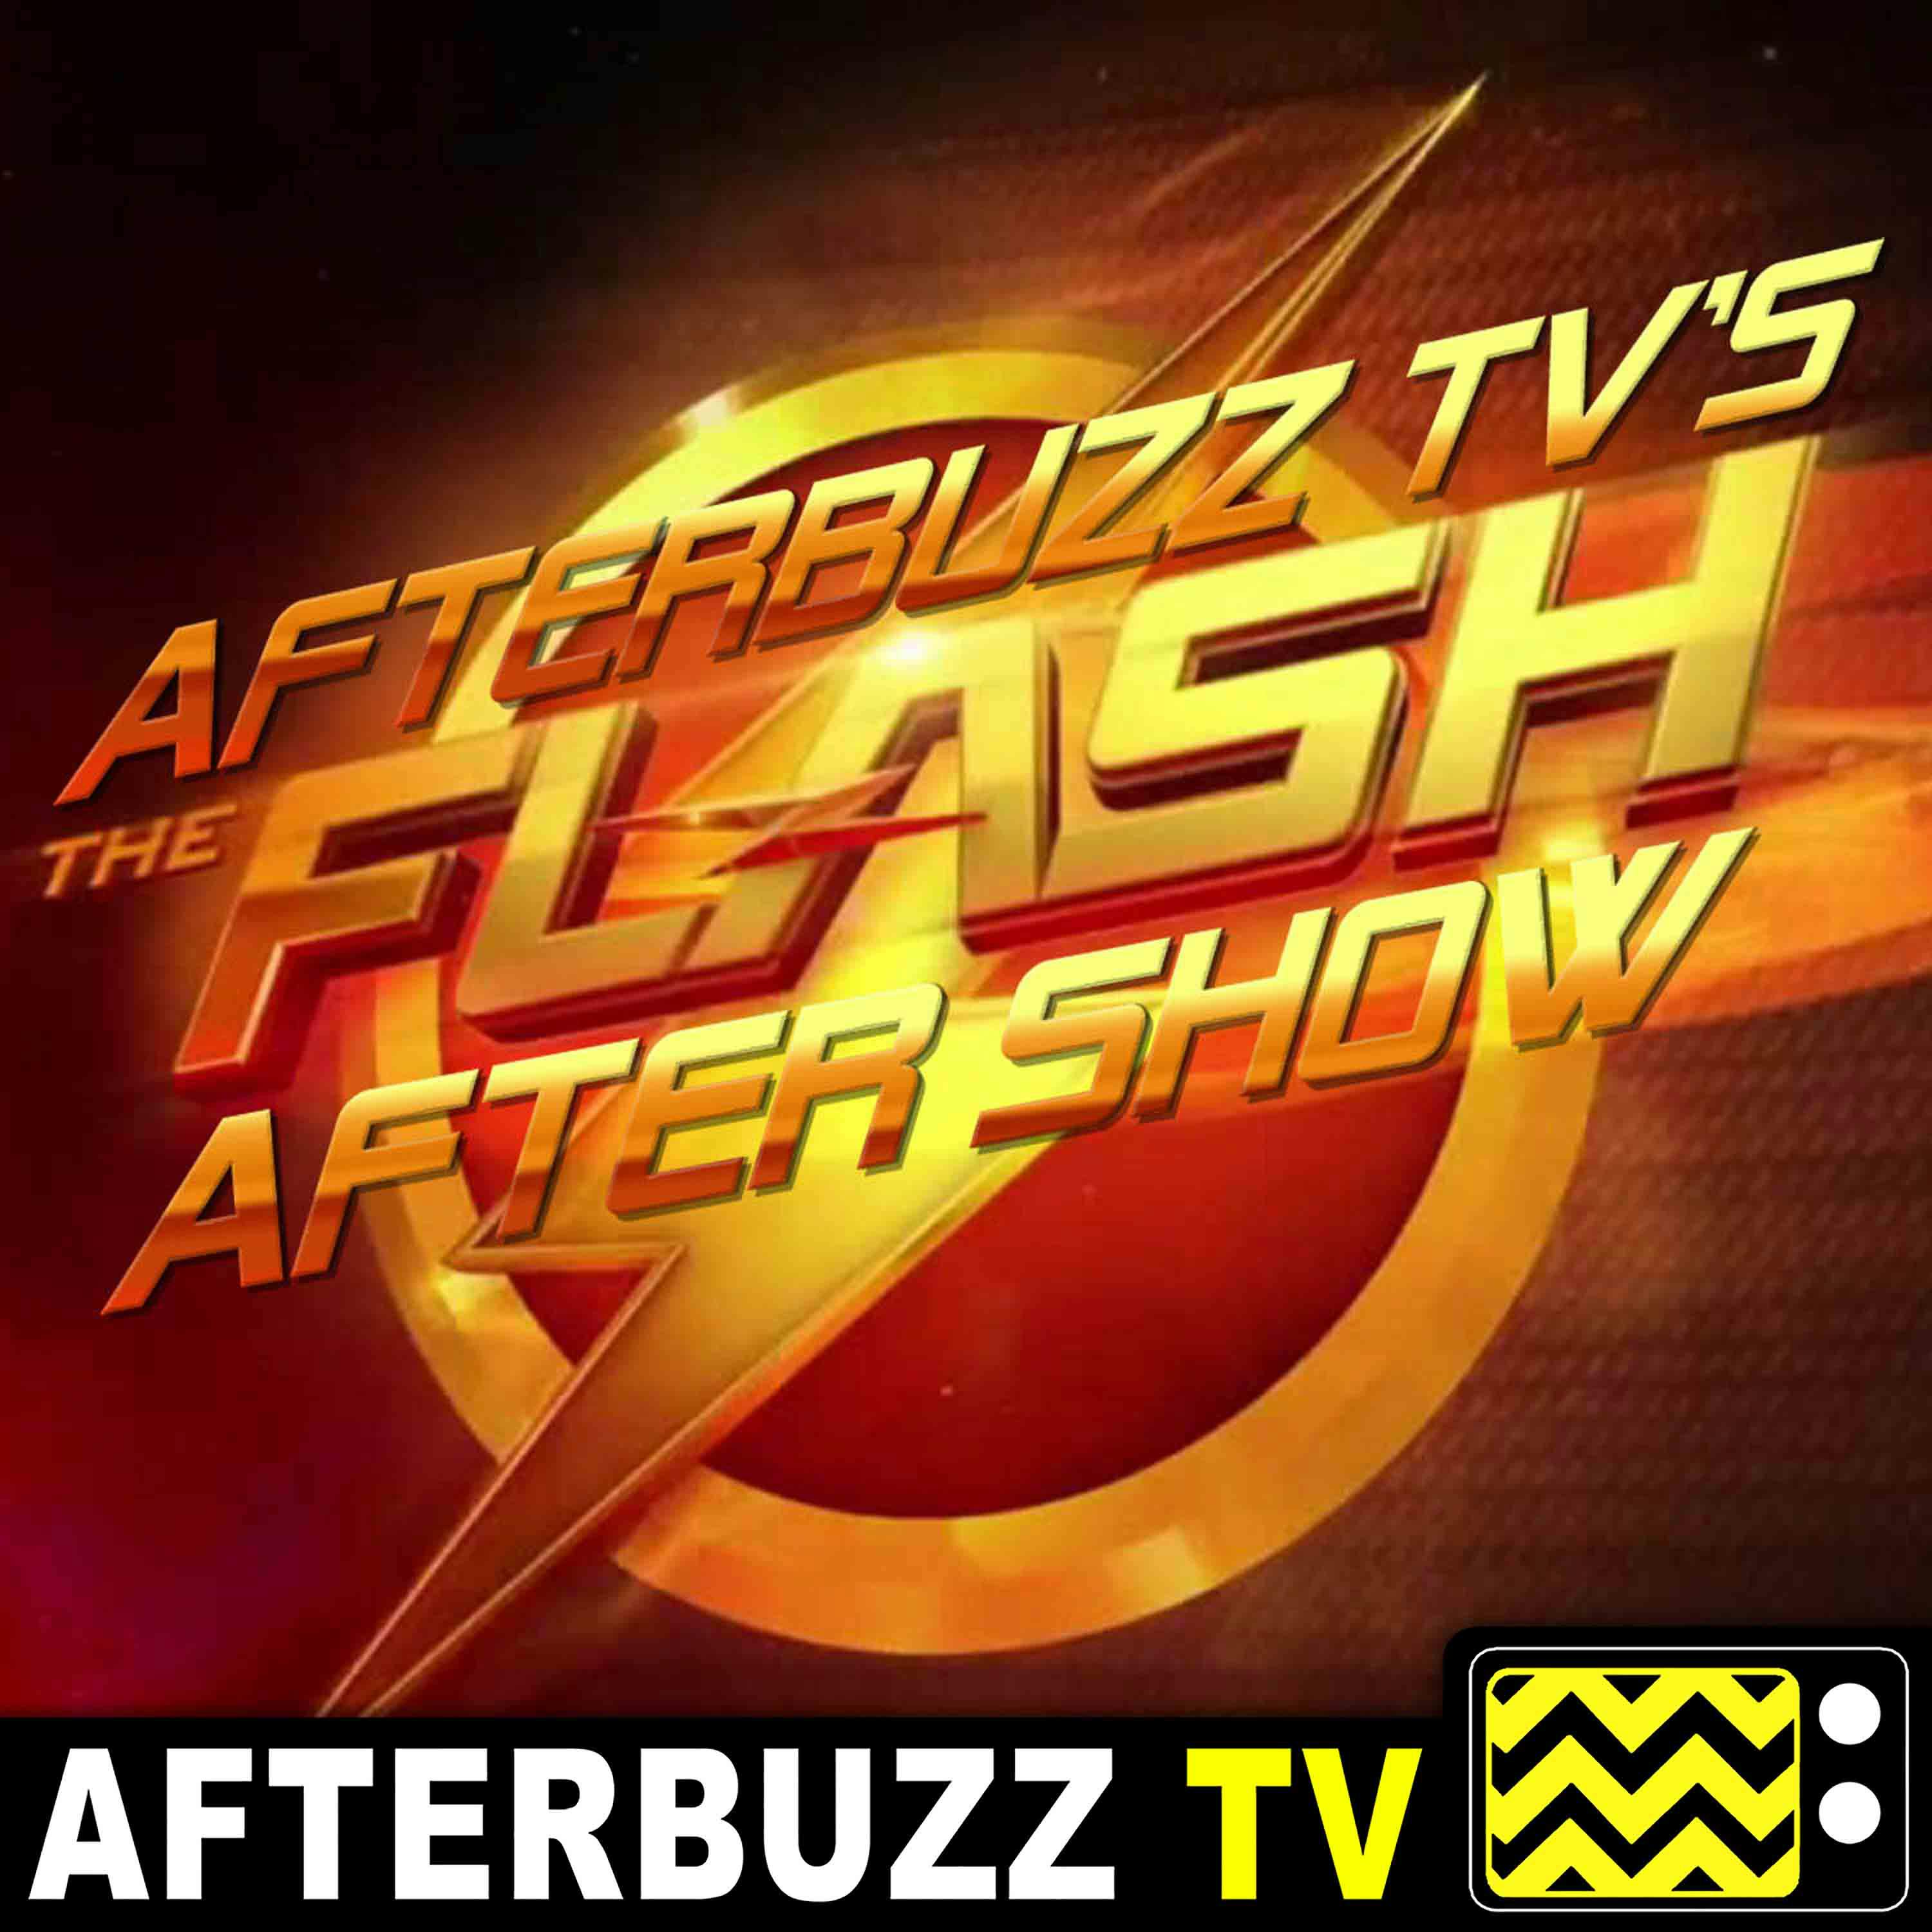 "License to Elongate" Season 6 Episode 6 'The Flash' Review